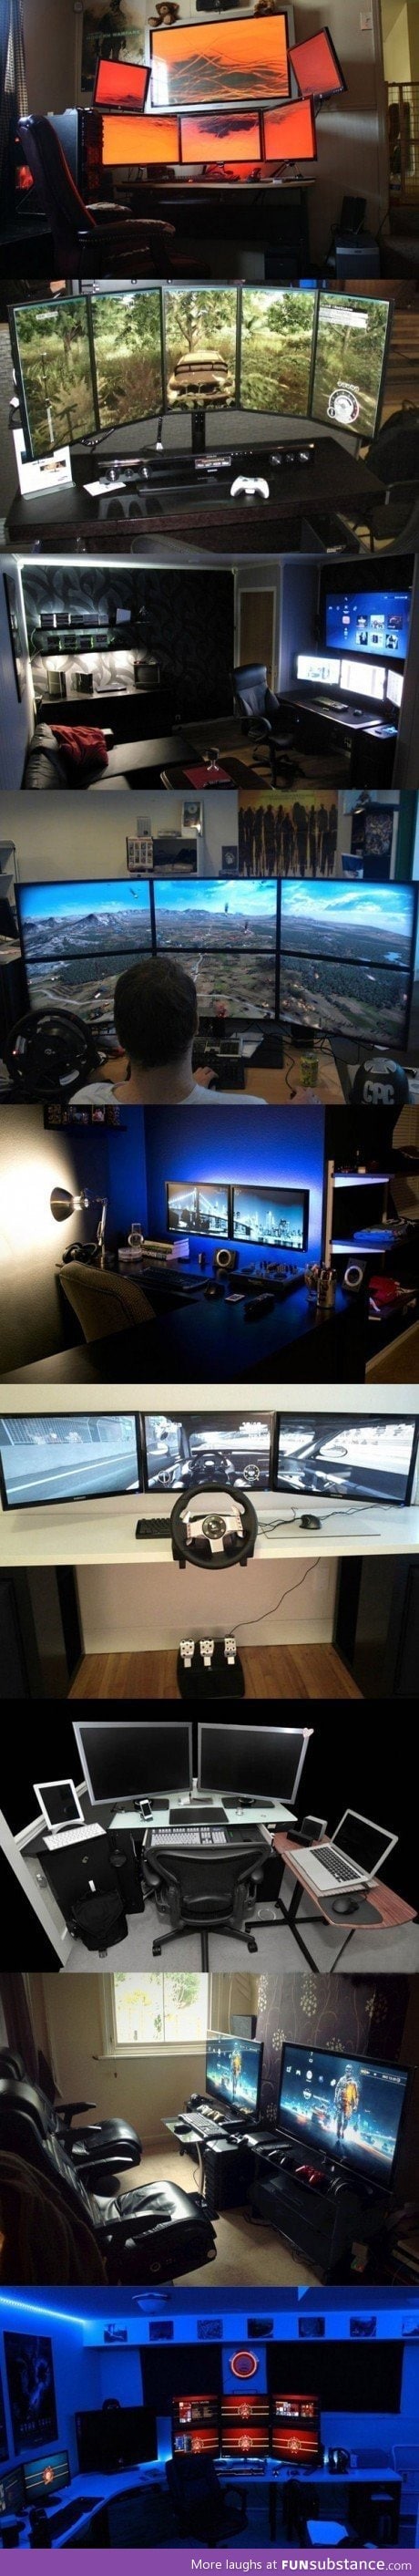 Every gamers dream